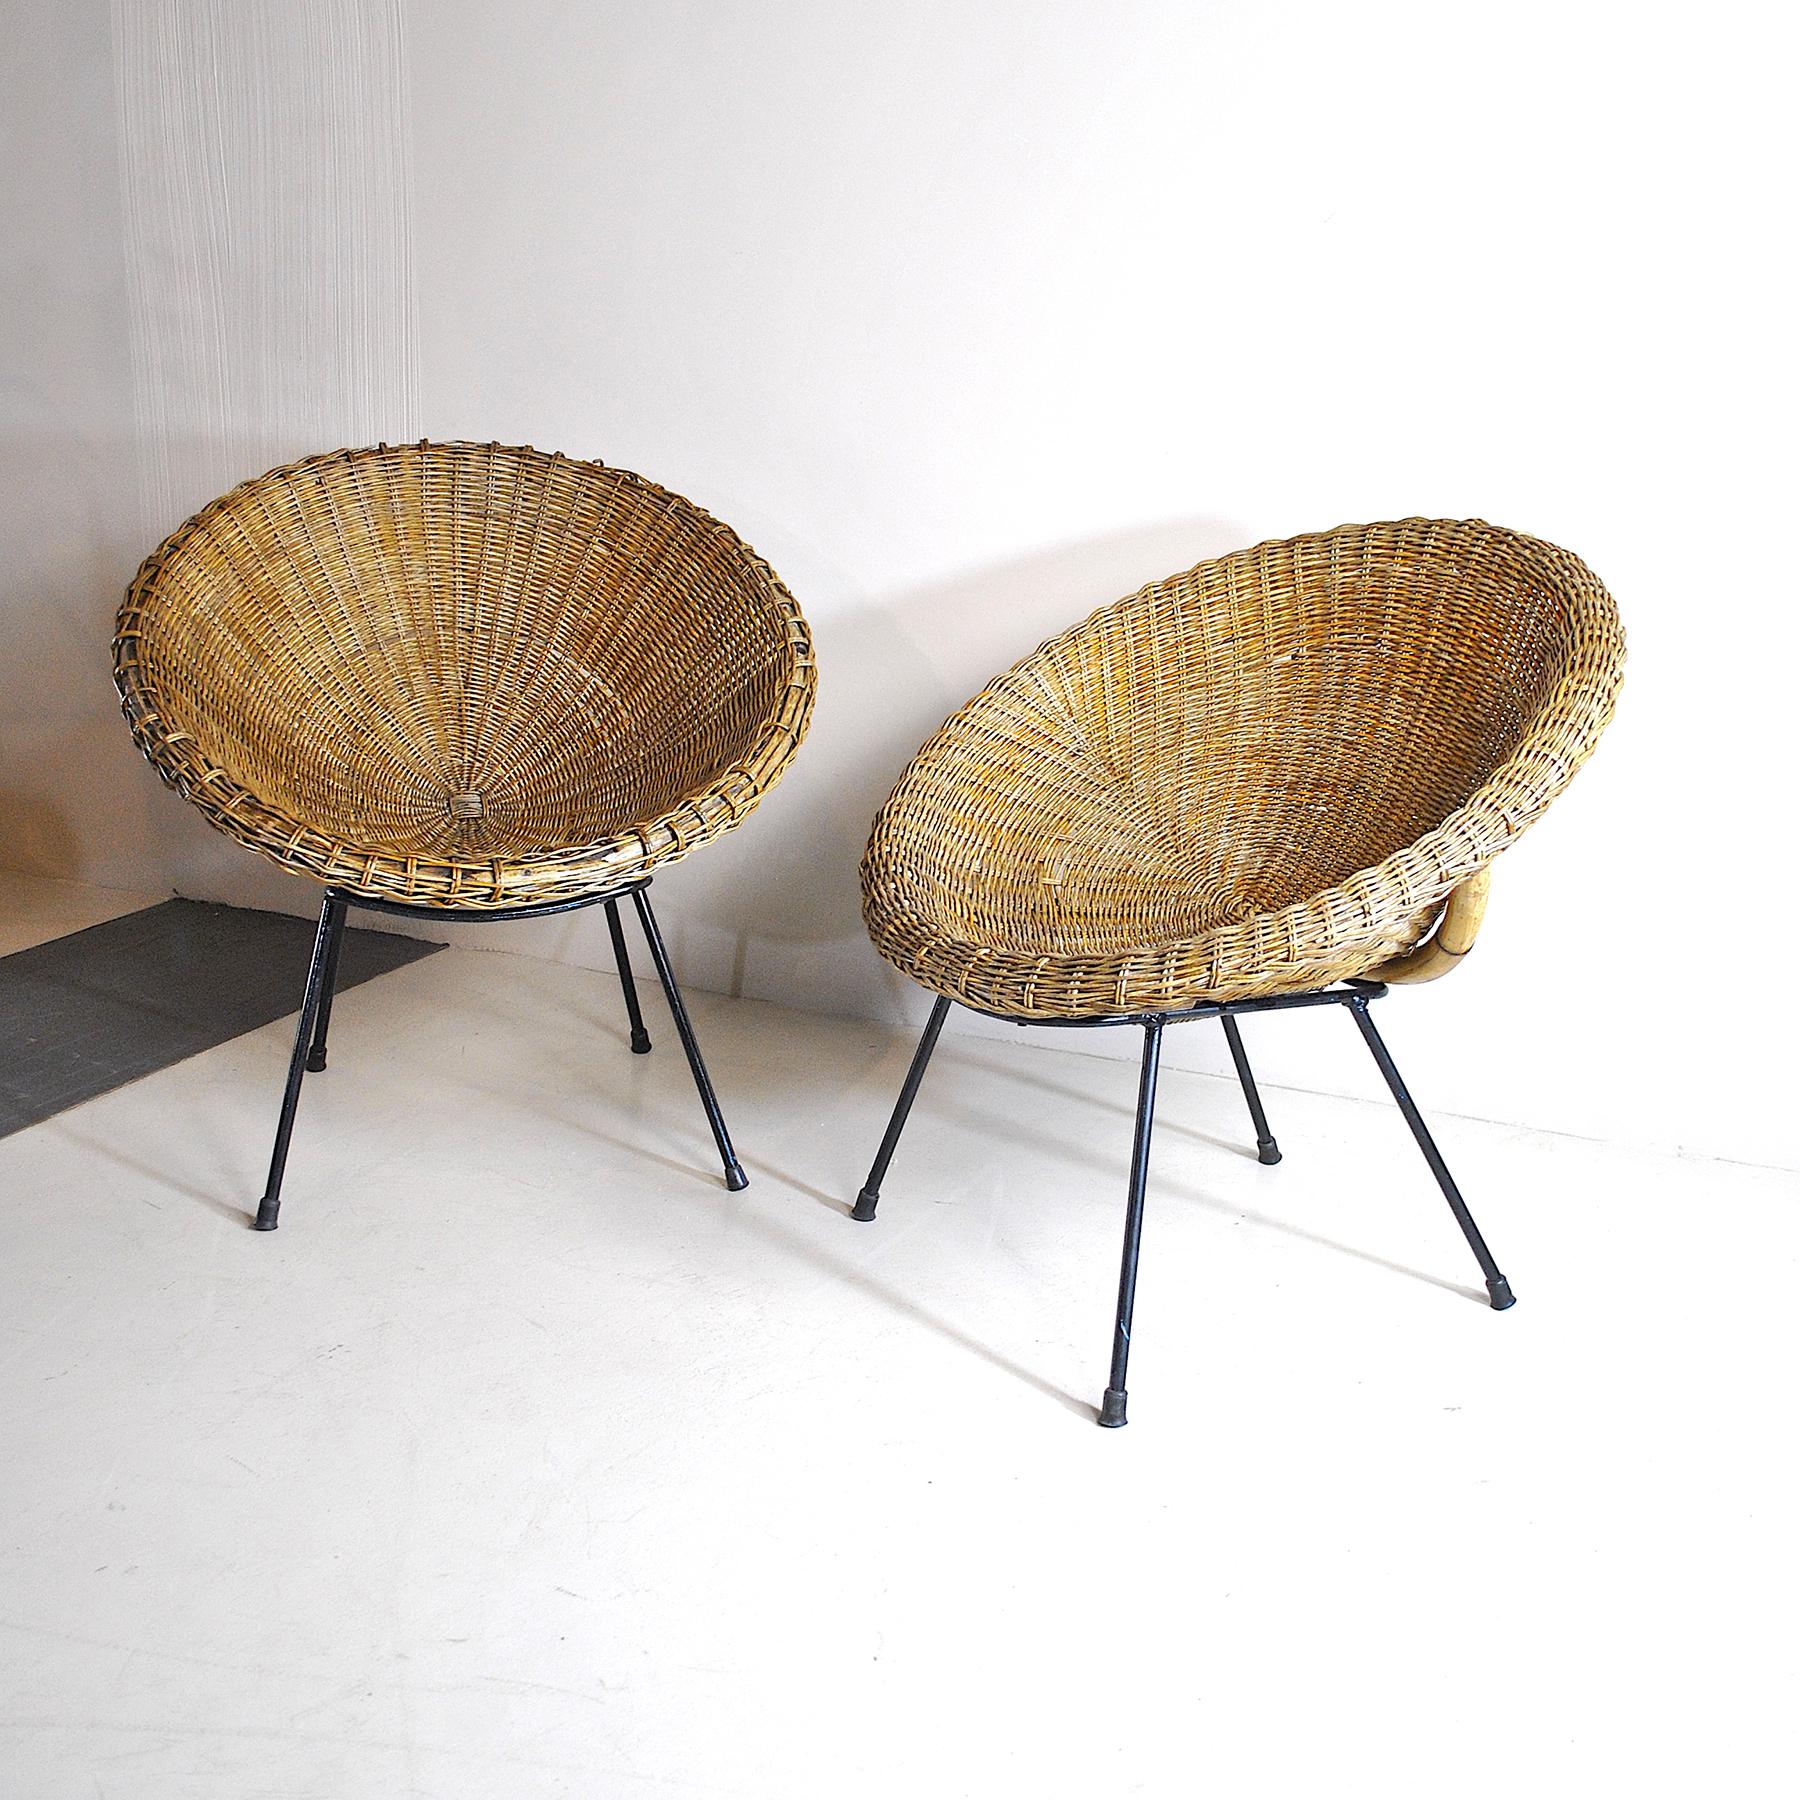 Metal Italian Midcentury 1960s Eggs Cane Chairs For Sale